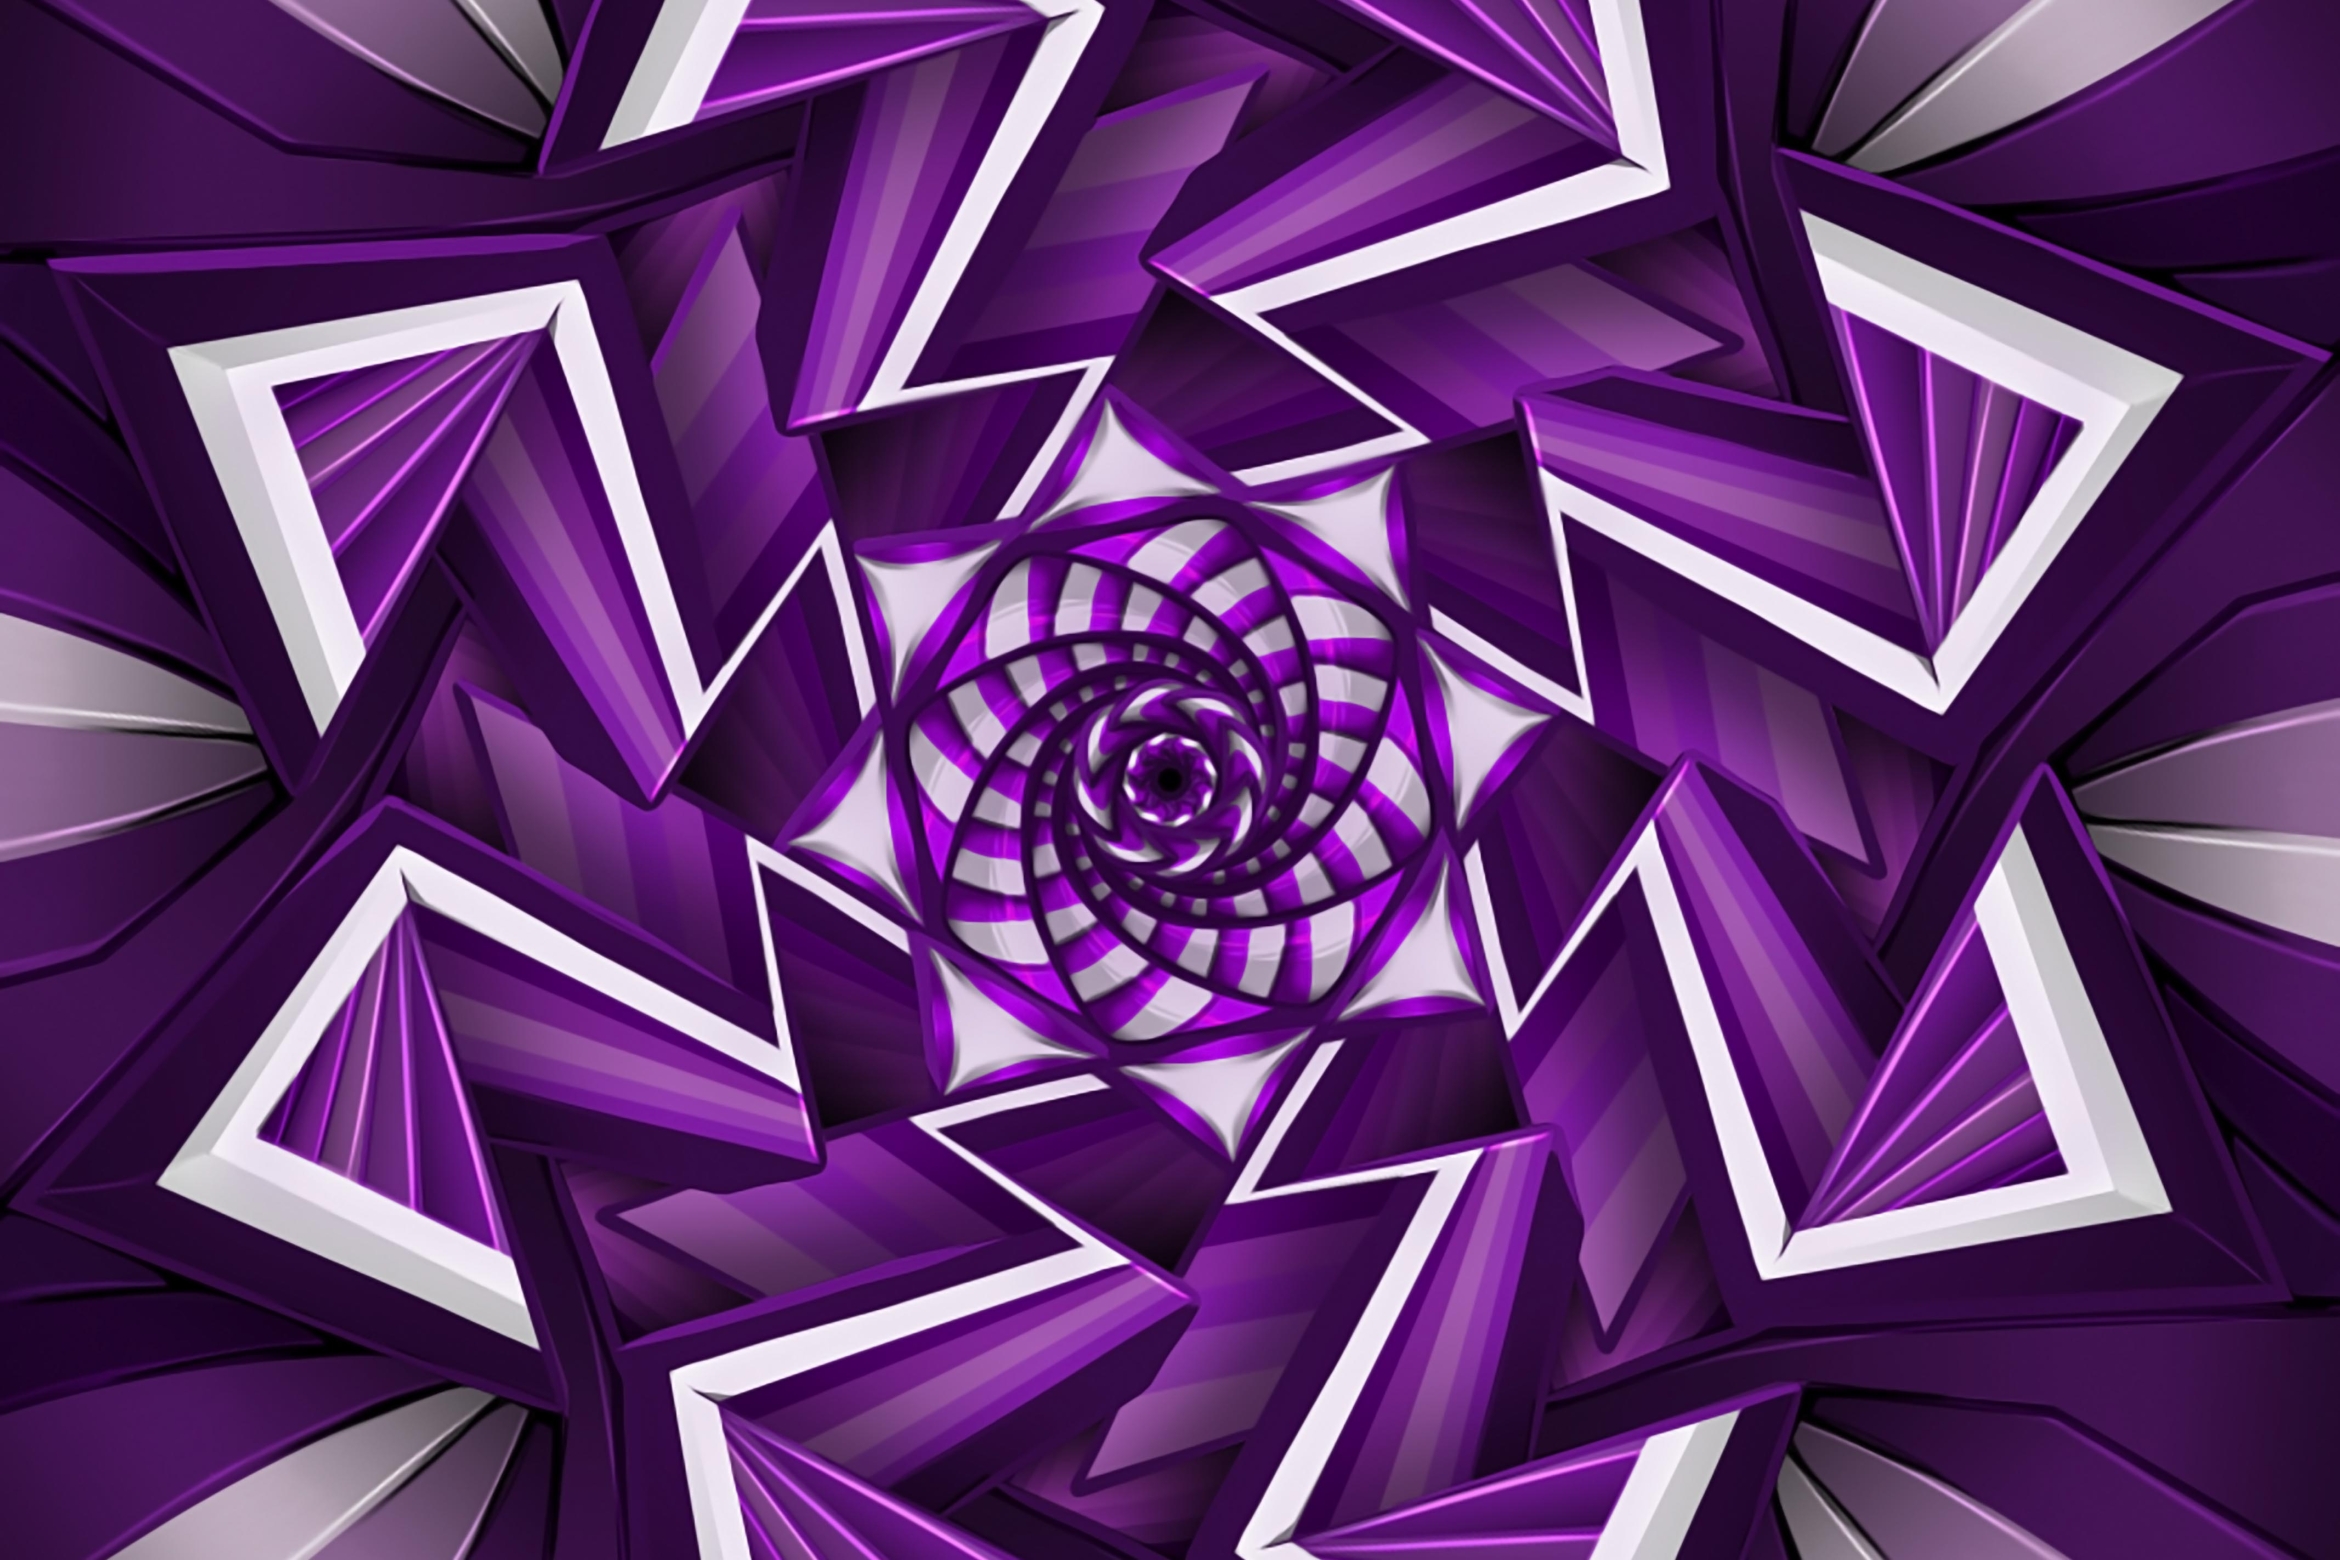 A purple, black and white graphic of mixed shapes